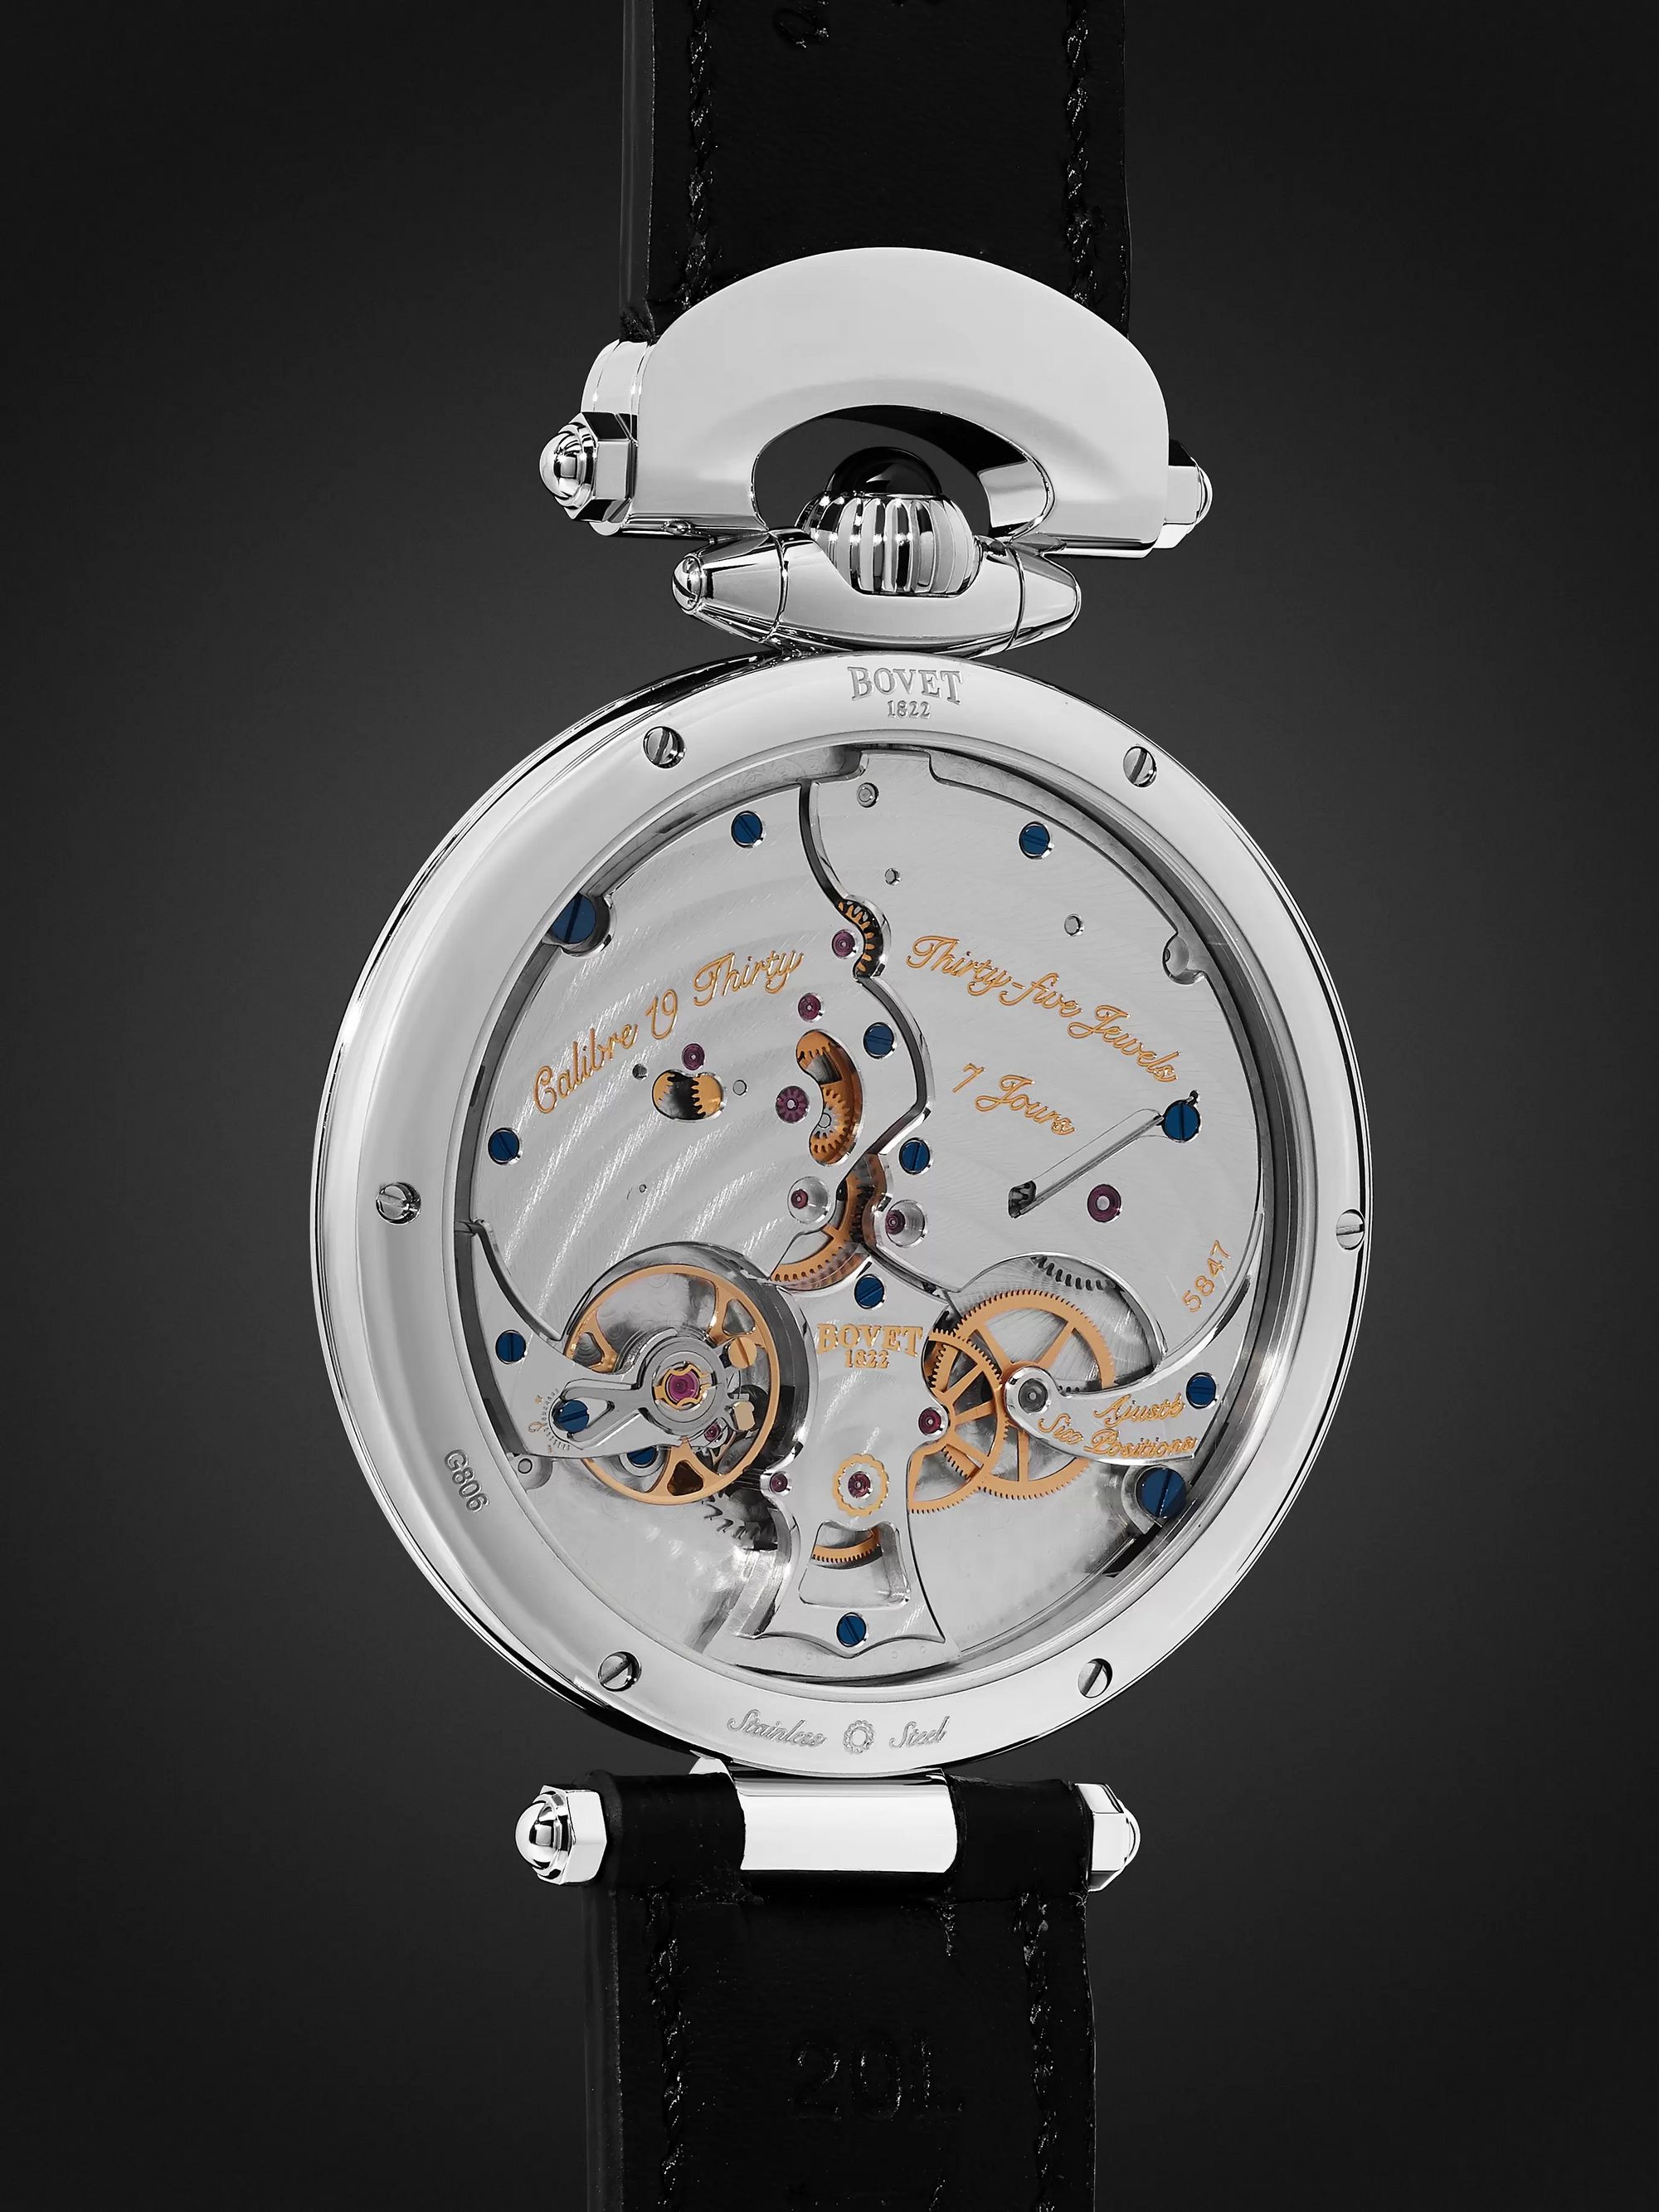 BOVET 19Thirty Fleurier Hand-Wound 42mm Stainless Steel and Leather Watch, Ref. No. NTR0029